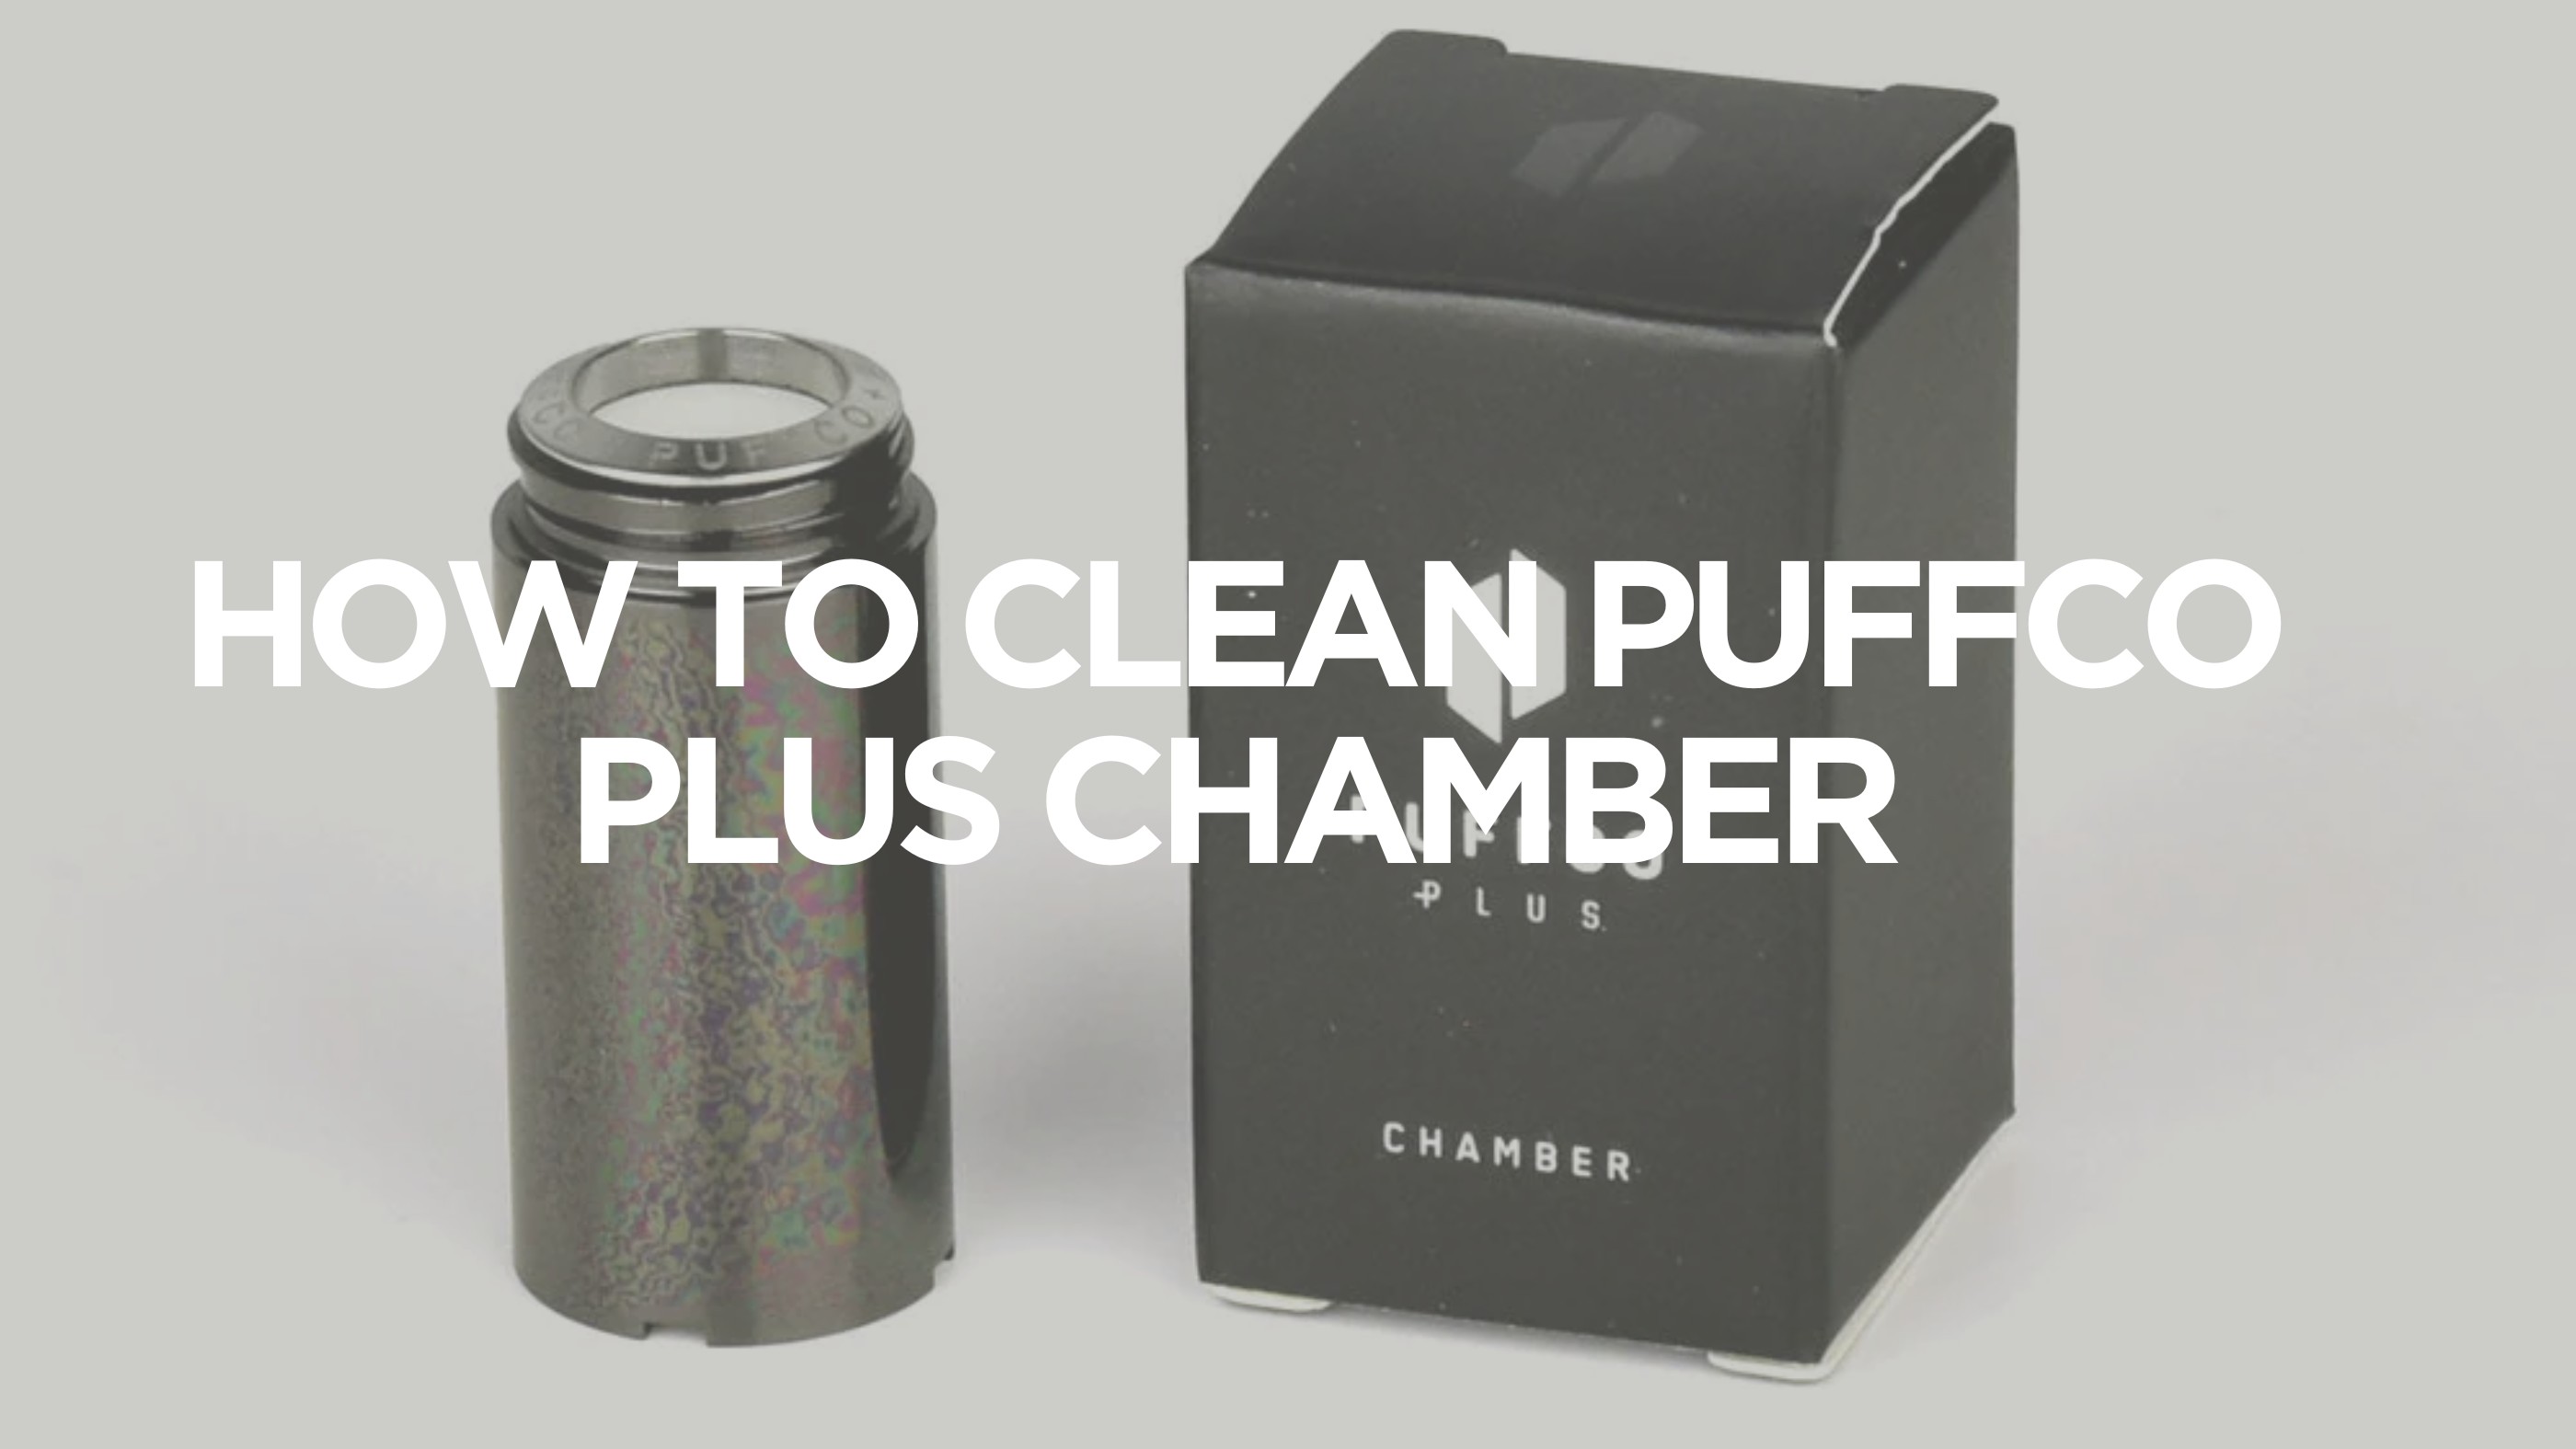 How to Clean Puffco Plus Chamber